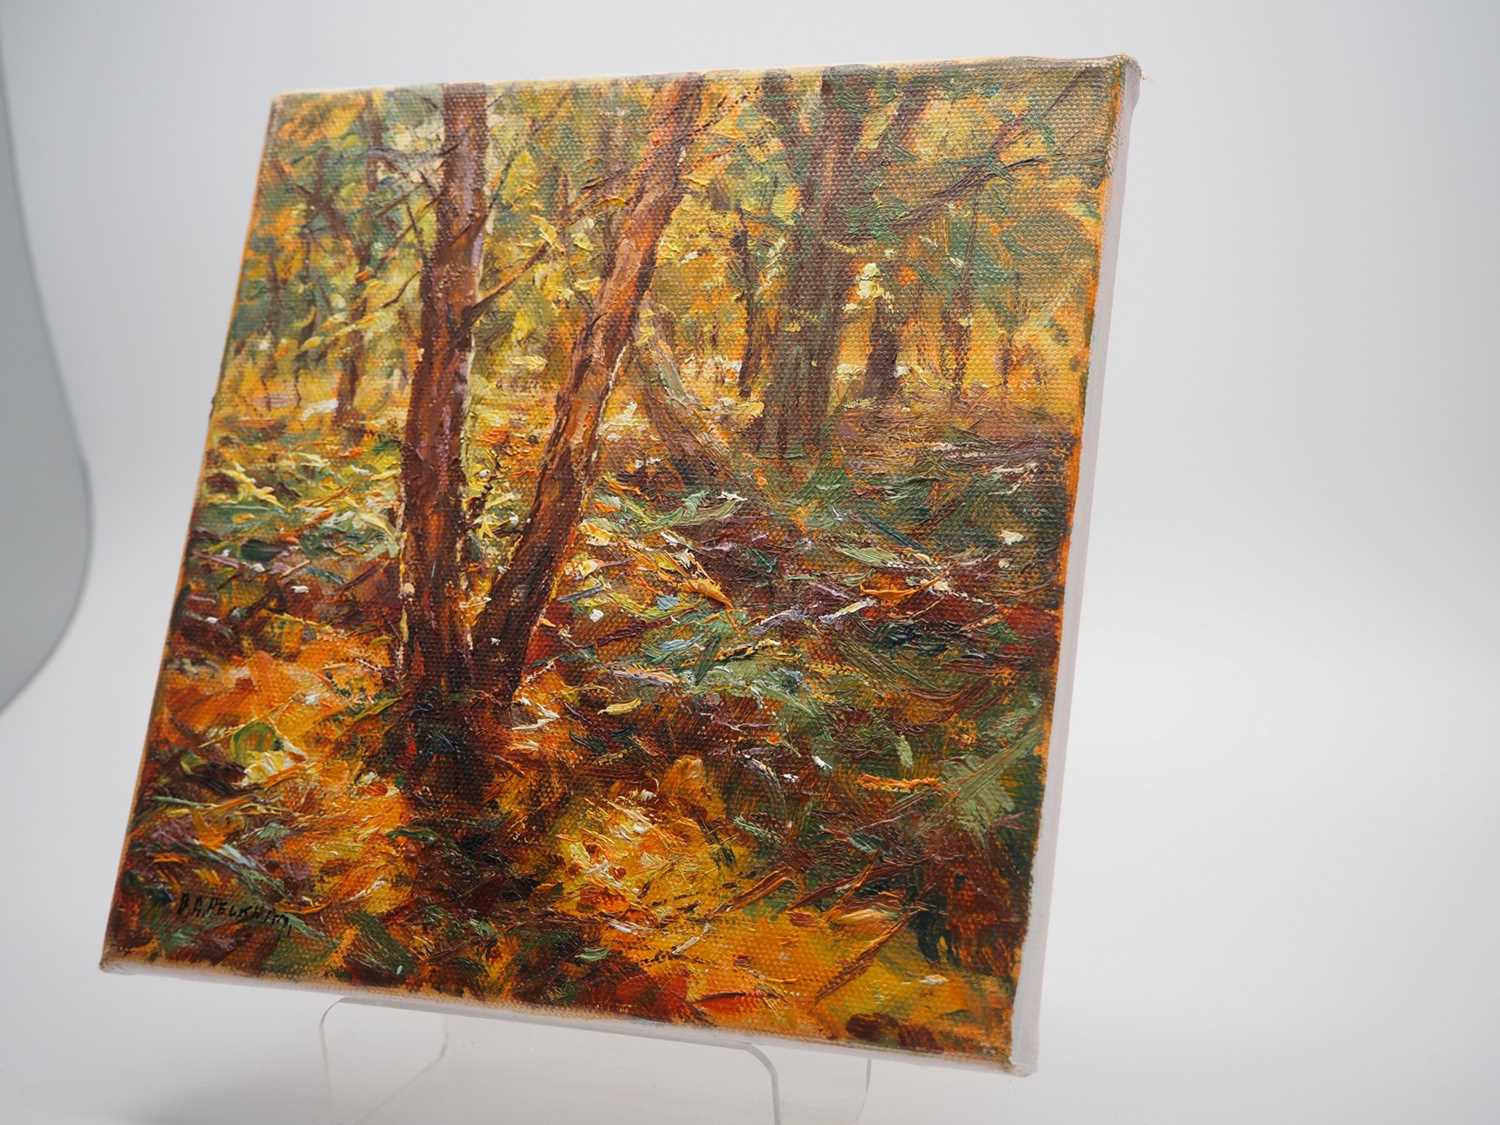 Barry Peckham 'FOREST' - oil on canvas - signed - 8" x 8" - PROVENANCE: Donated to and sold on - Image 2 of 3